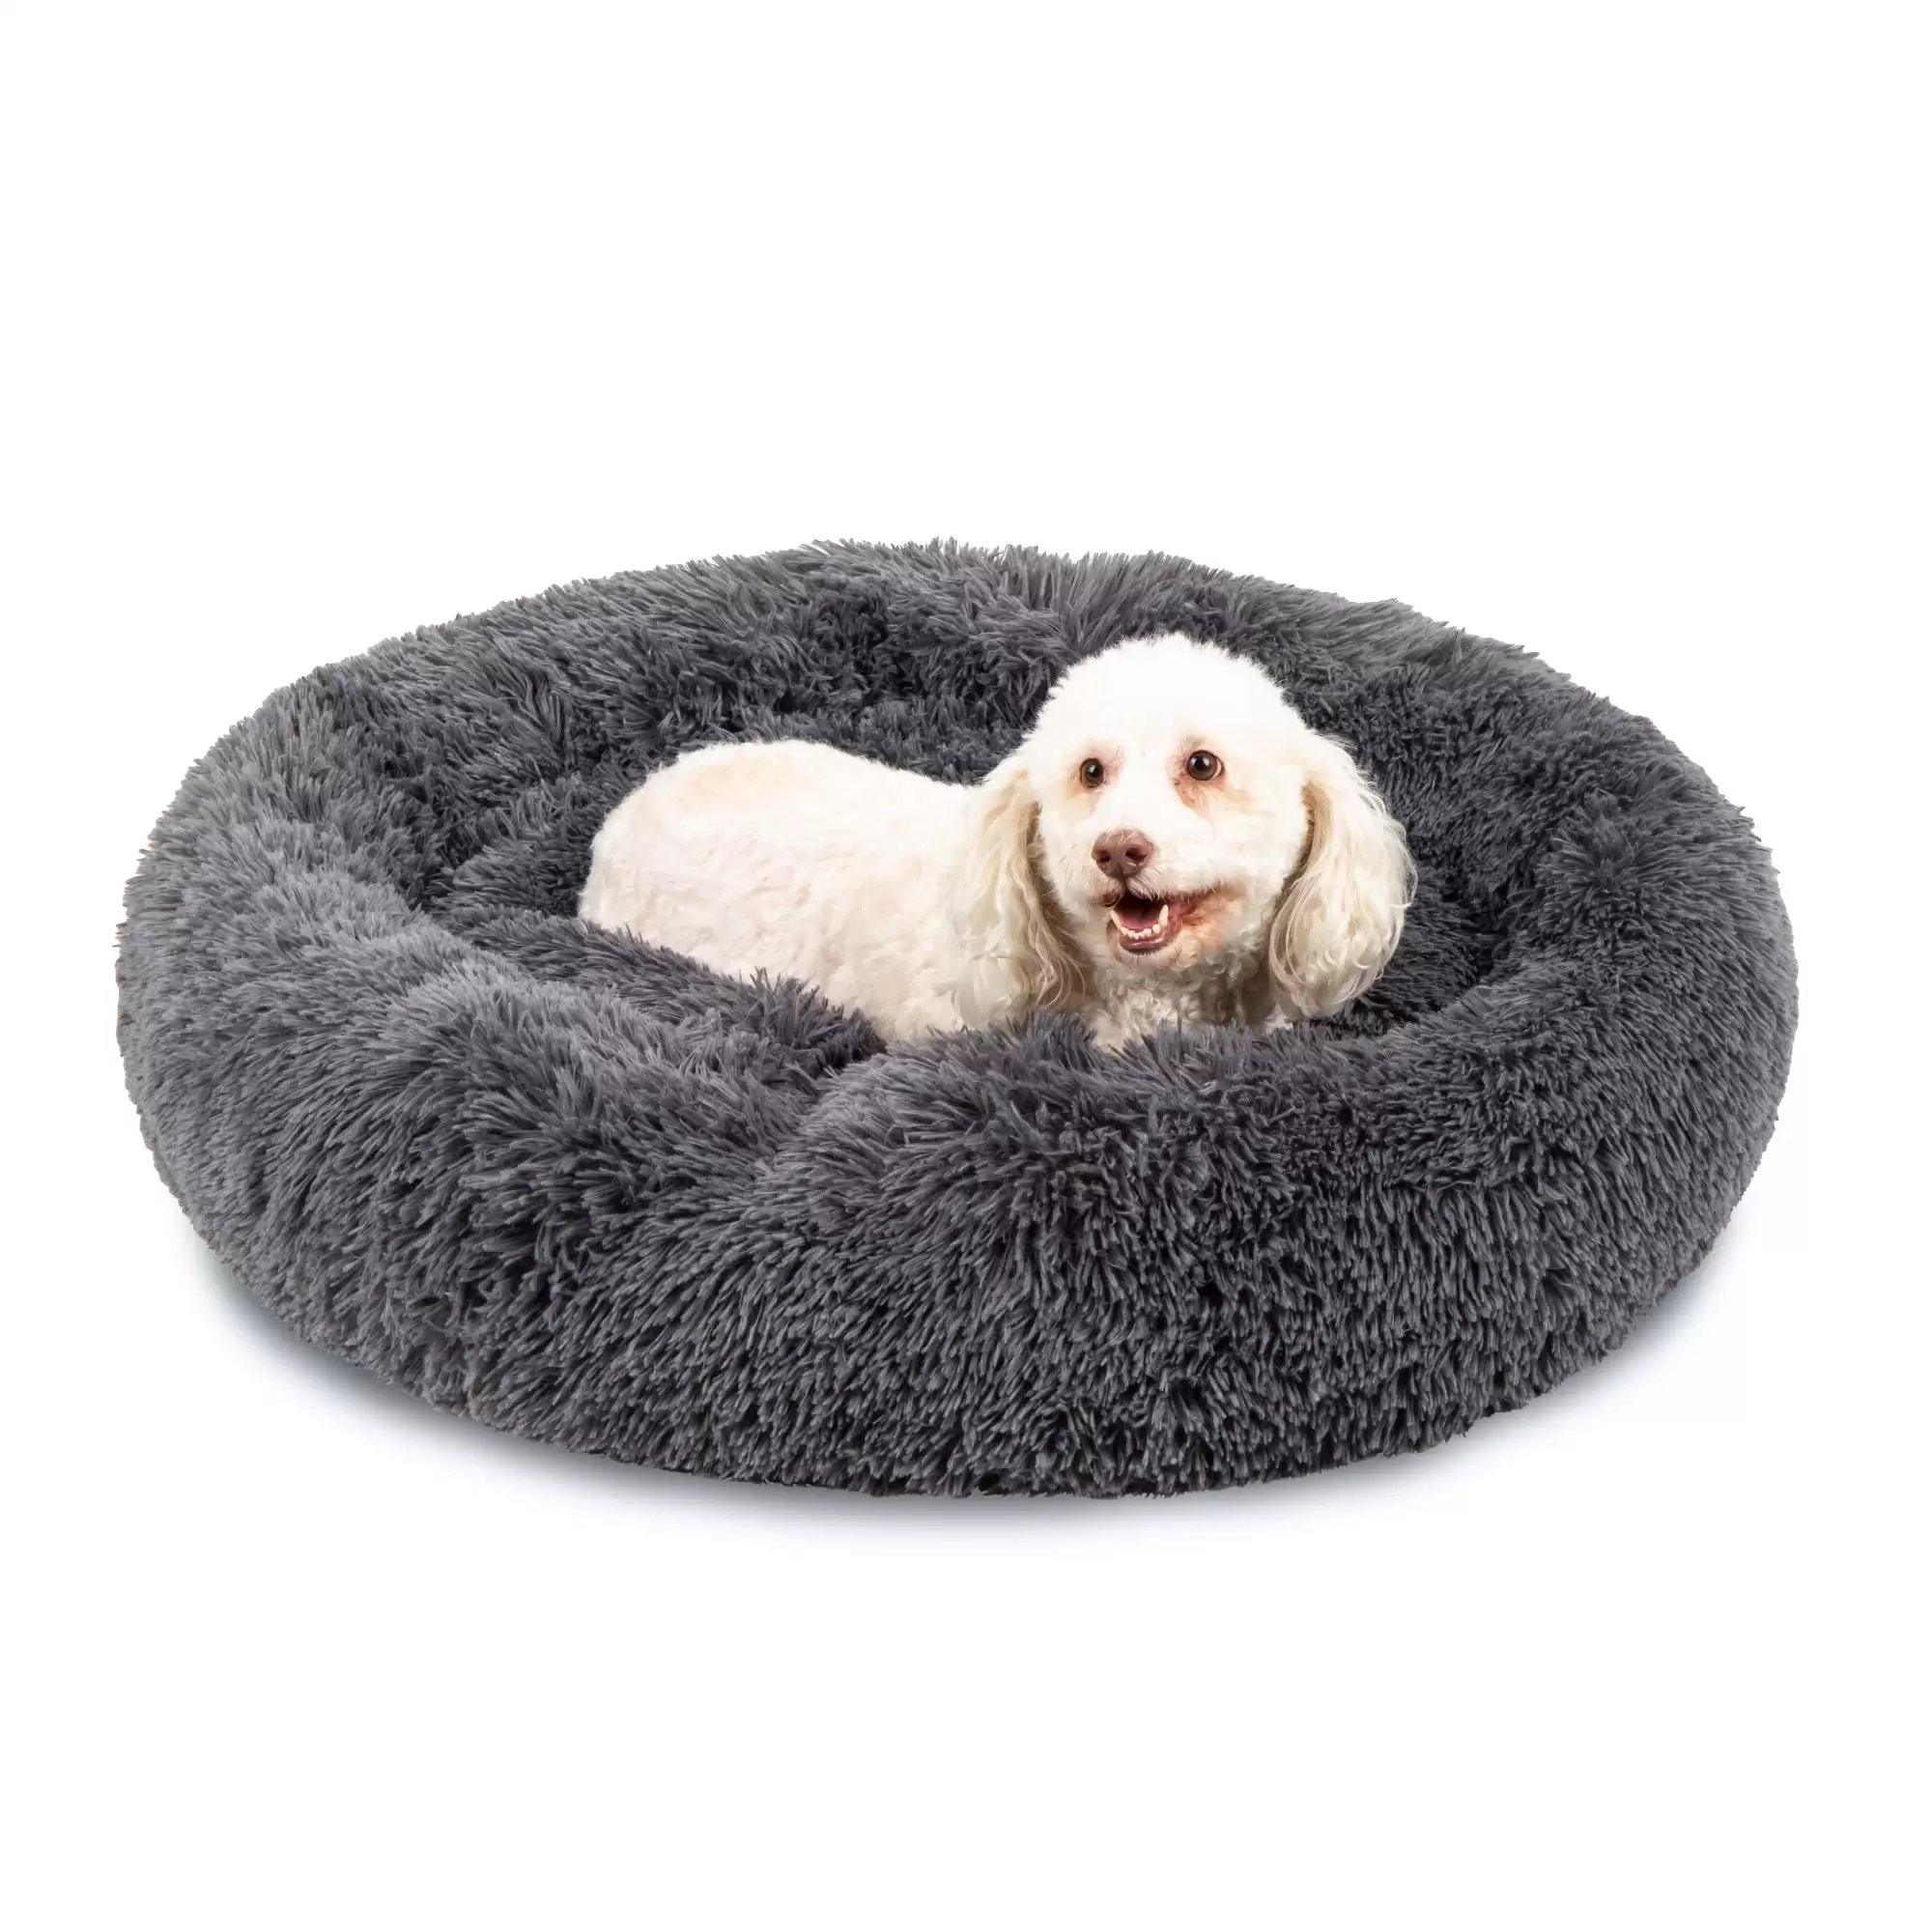 Pay Only $23.99 For Self-Warming Shag Fur Calming Pet Bed W/ Water-Resistant Lining - Gray With This Discount Coupon At Bestchoiceproducts